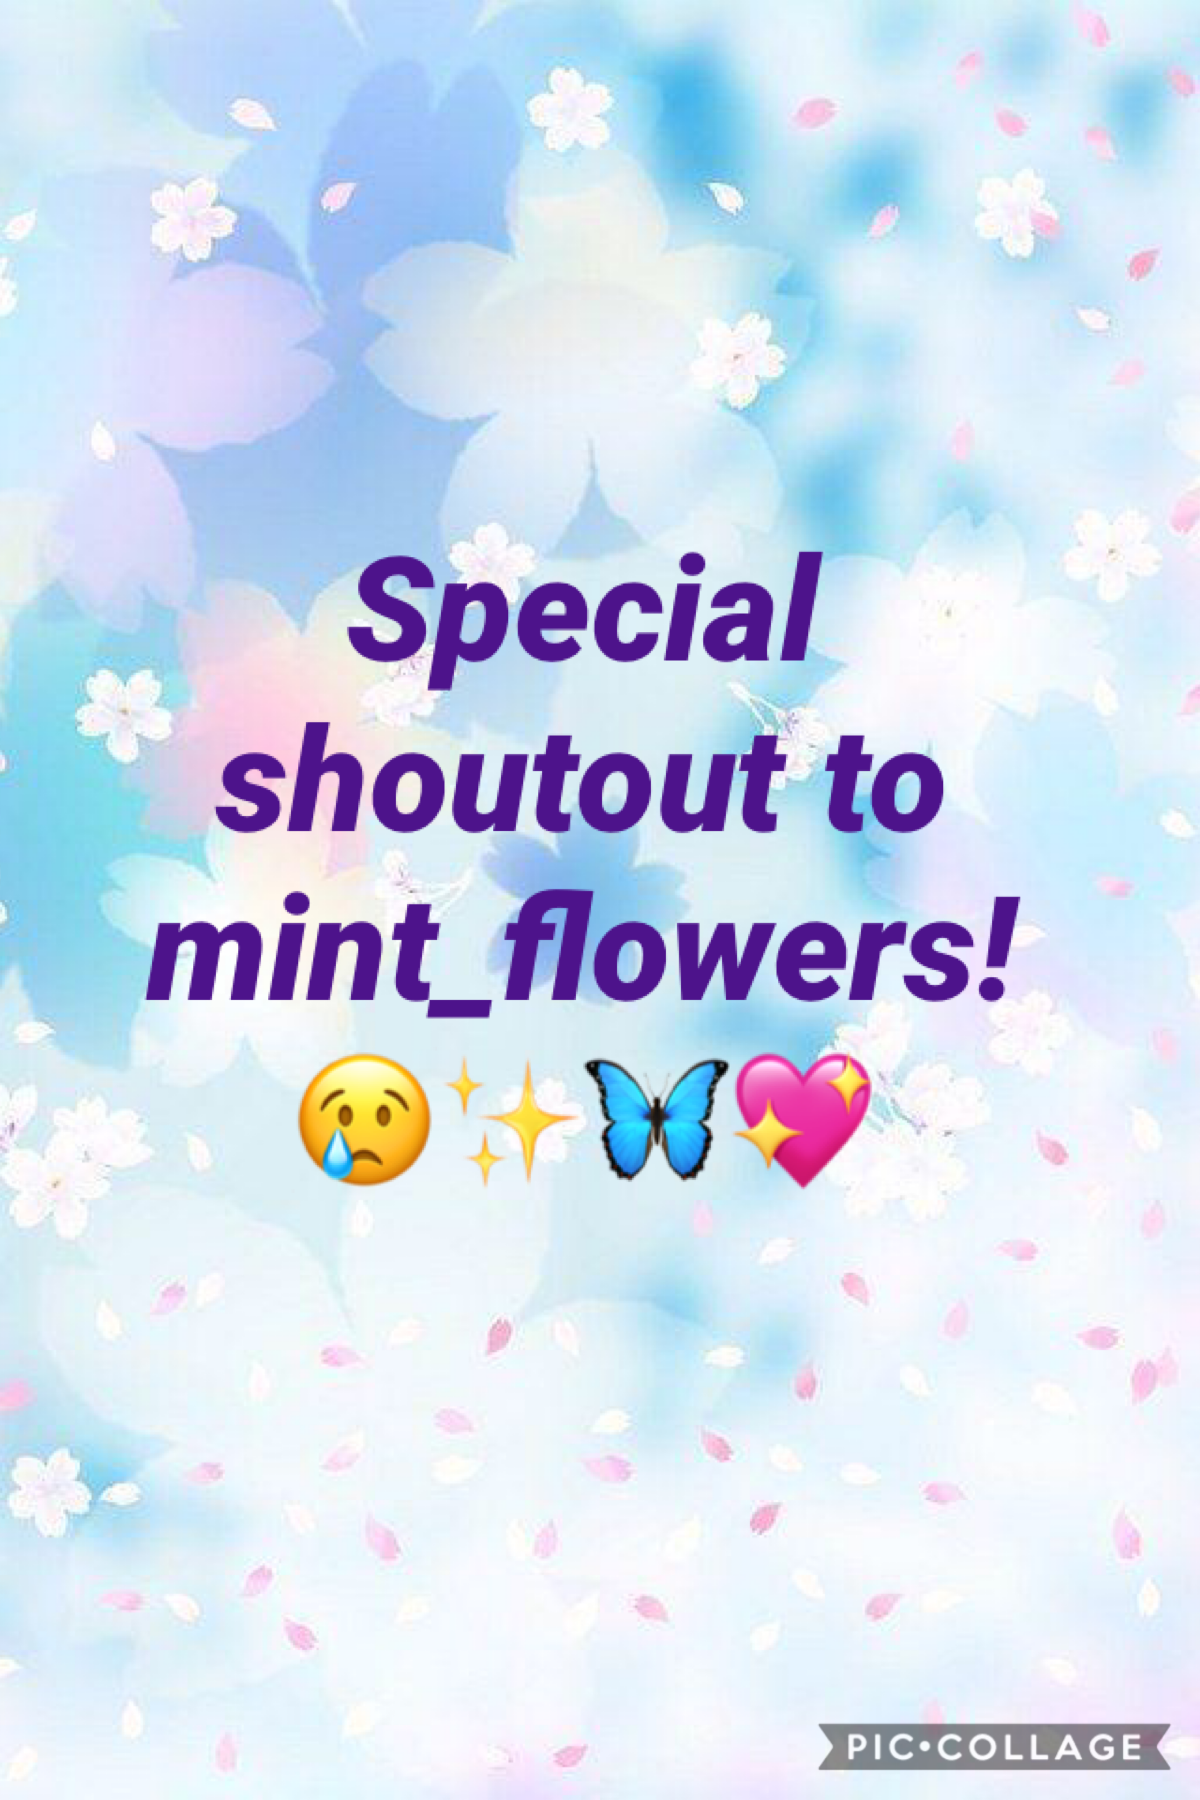 Special shoutout to mint_followers
Make sure to follow her